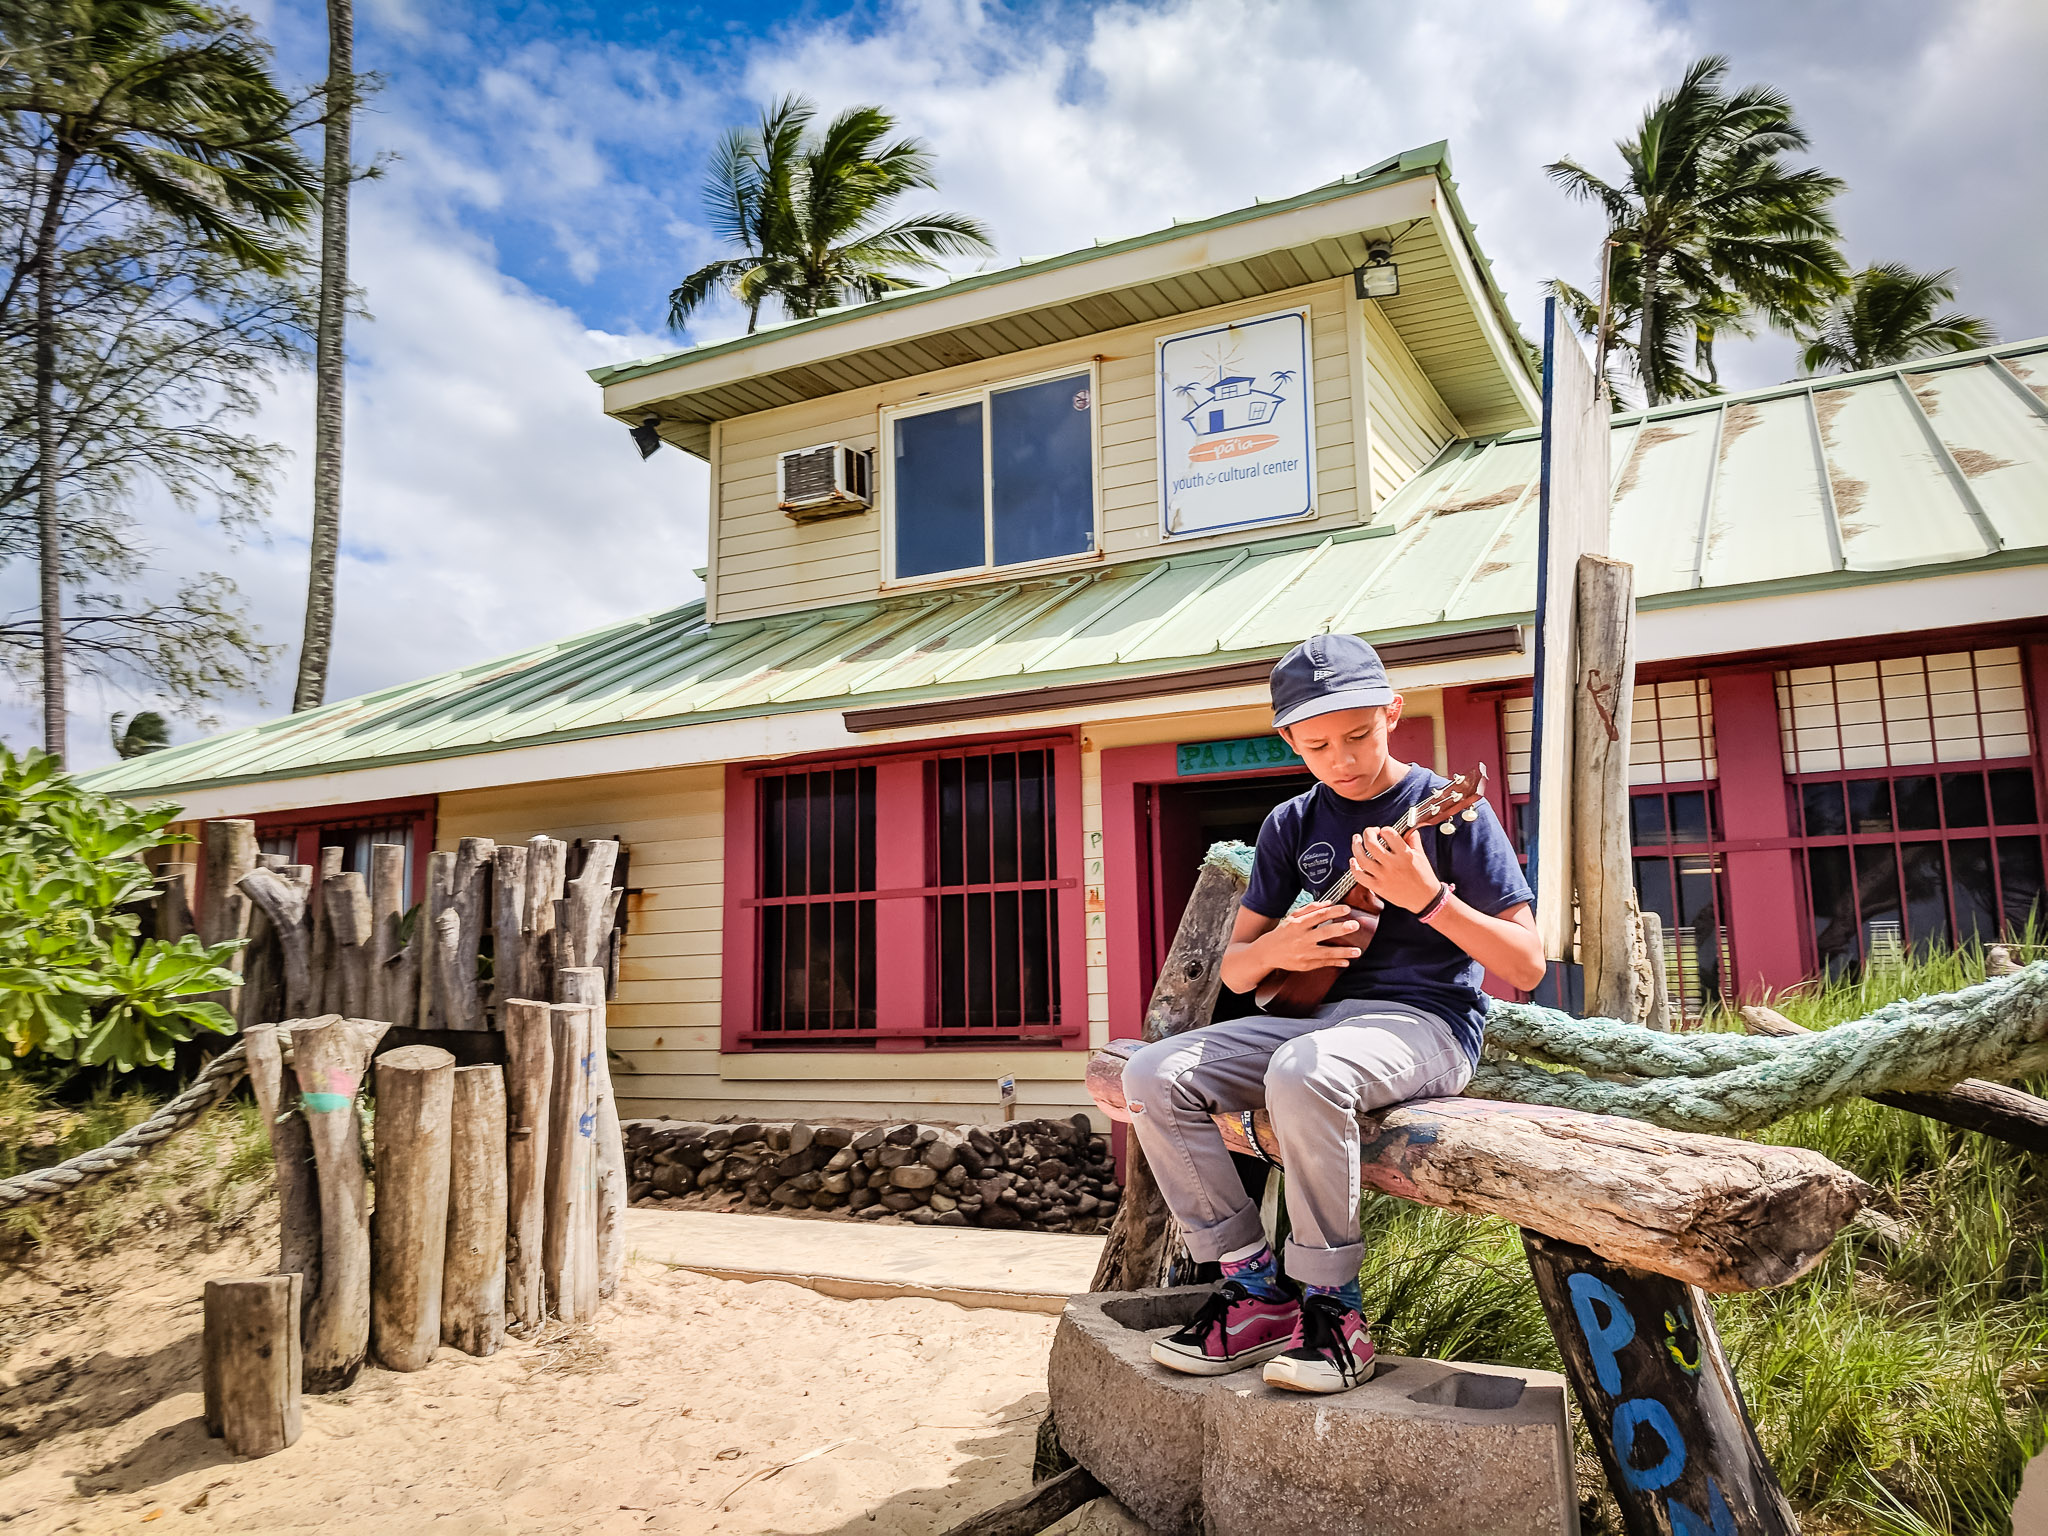 Paia Youth & Cultural Center - a place for kids!